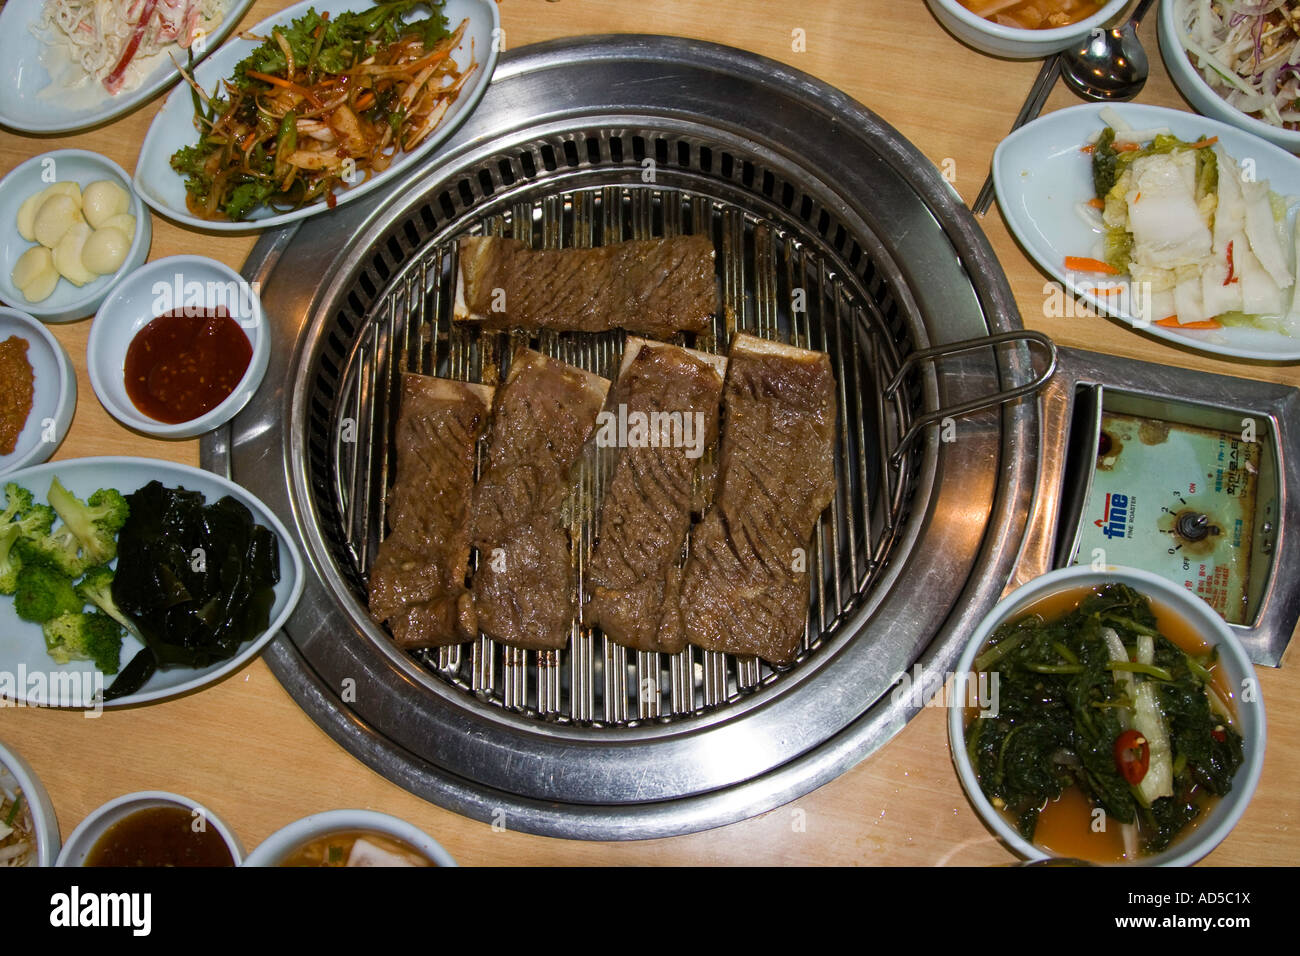 Kalbi or Galbi Beef Short Ribs Grilling on the BBQ at a Korean Galbi House Seoul South Korea Stock Photo